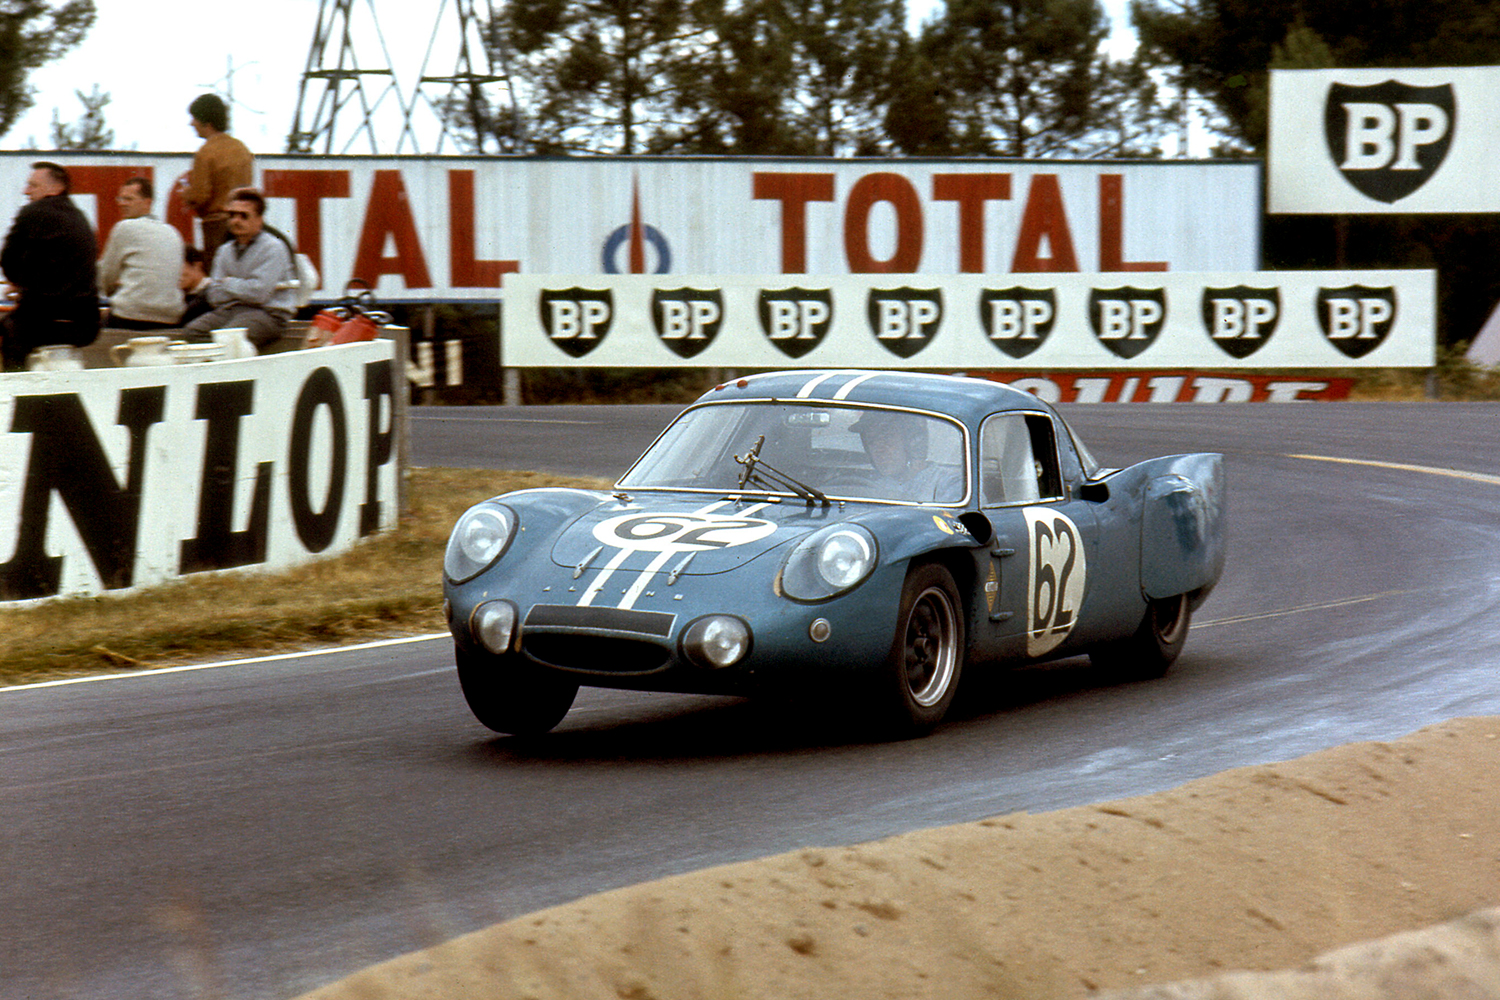 <strong>Alpine A210</strong><br><strong>Car numbers: </strong>44, 45, 46, 47, 55 and 62<br>Of the 15 cars that finished the ‘66 Le Mans (yes, only 15 closed out the day), little-known automaker Alpine came up second in number of finishers with No. 62, 44, 45 and 46 all making it to the end. The marque closed up shop in 1995 but <a href="https://www.alpinecars.com/en/">relaunched in 2017</a>.<br><br>